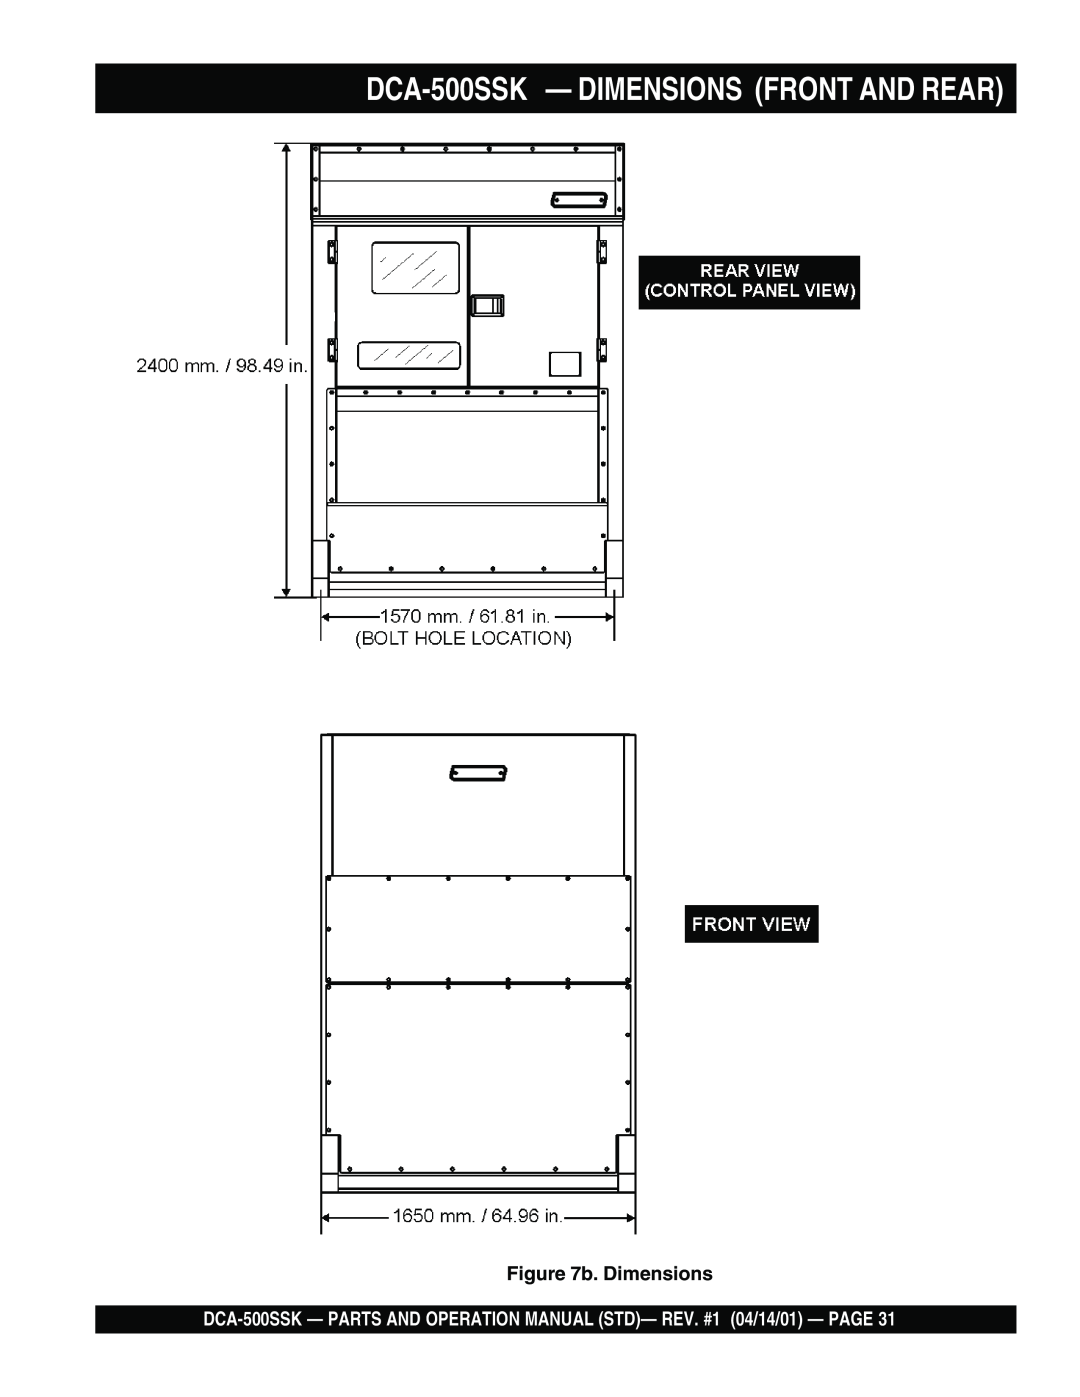 Multiquip operation manual DCA-500SSK - DIMENSIONS FRONT AND REAR, b. Dimensions 